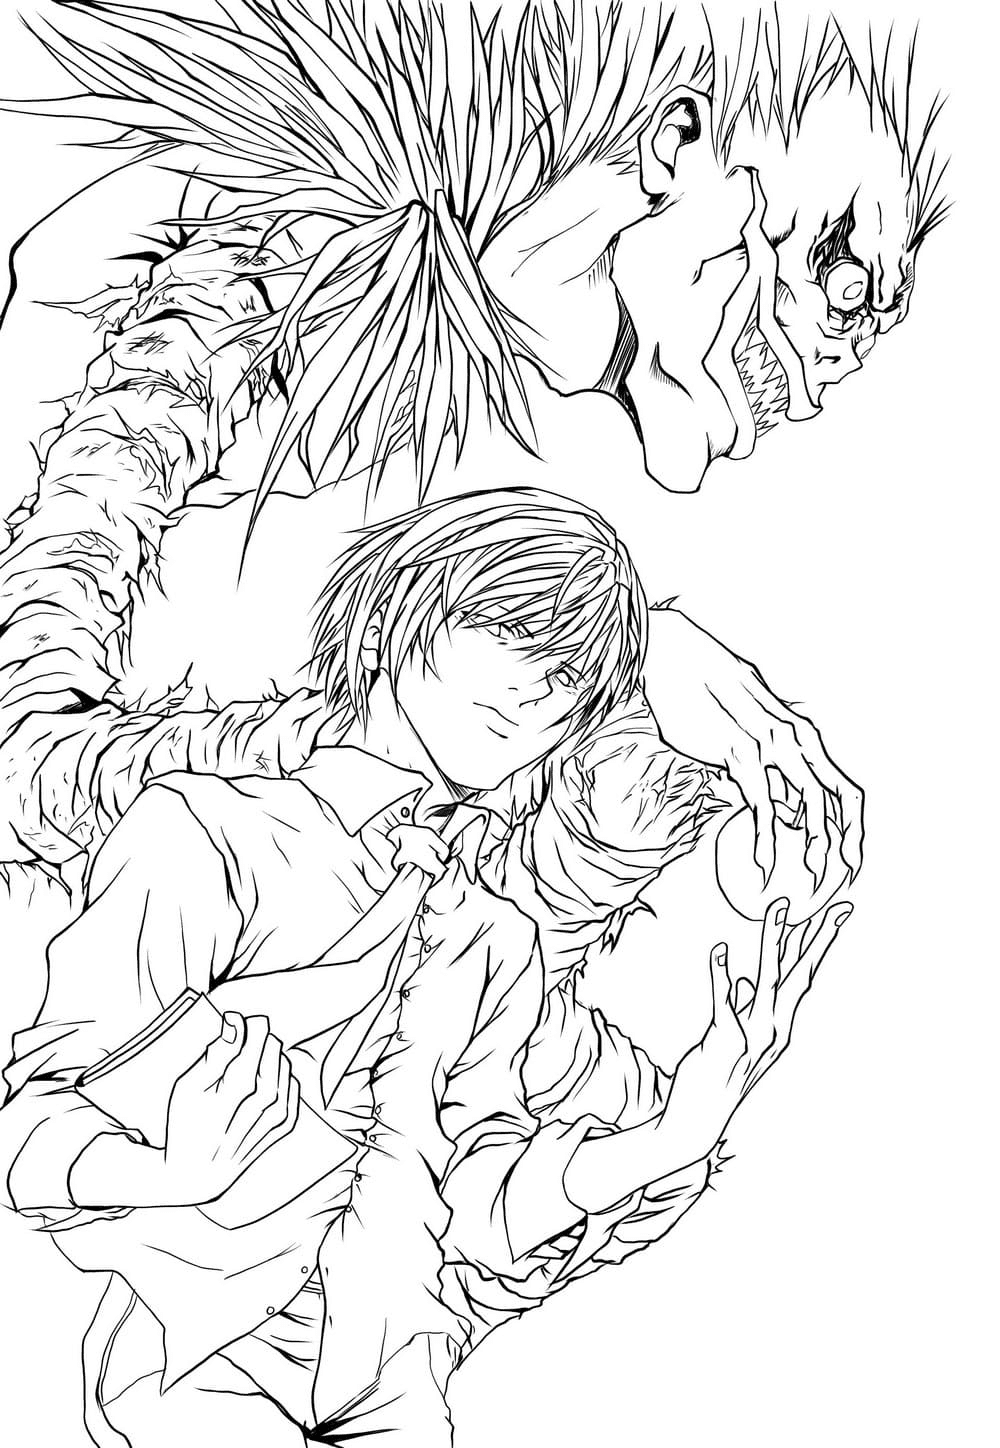 Yagami gives an apple to Ryuk Coloring Page